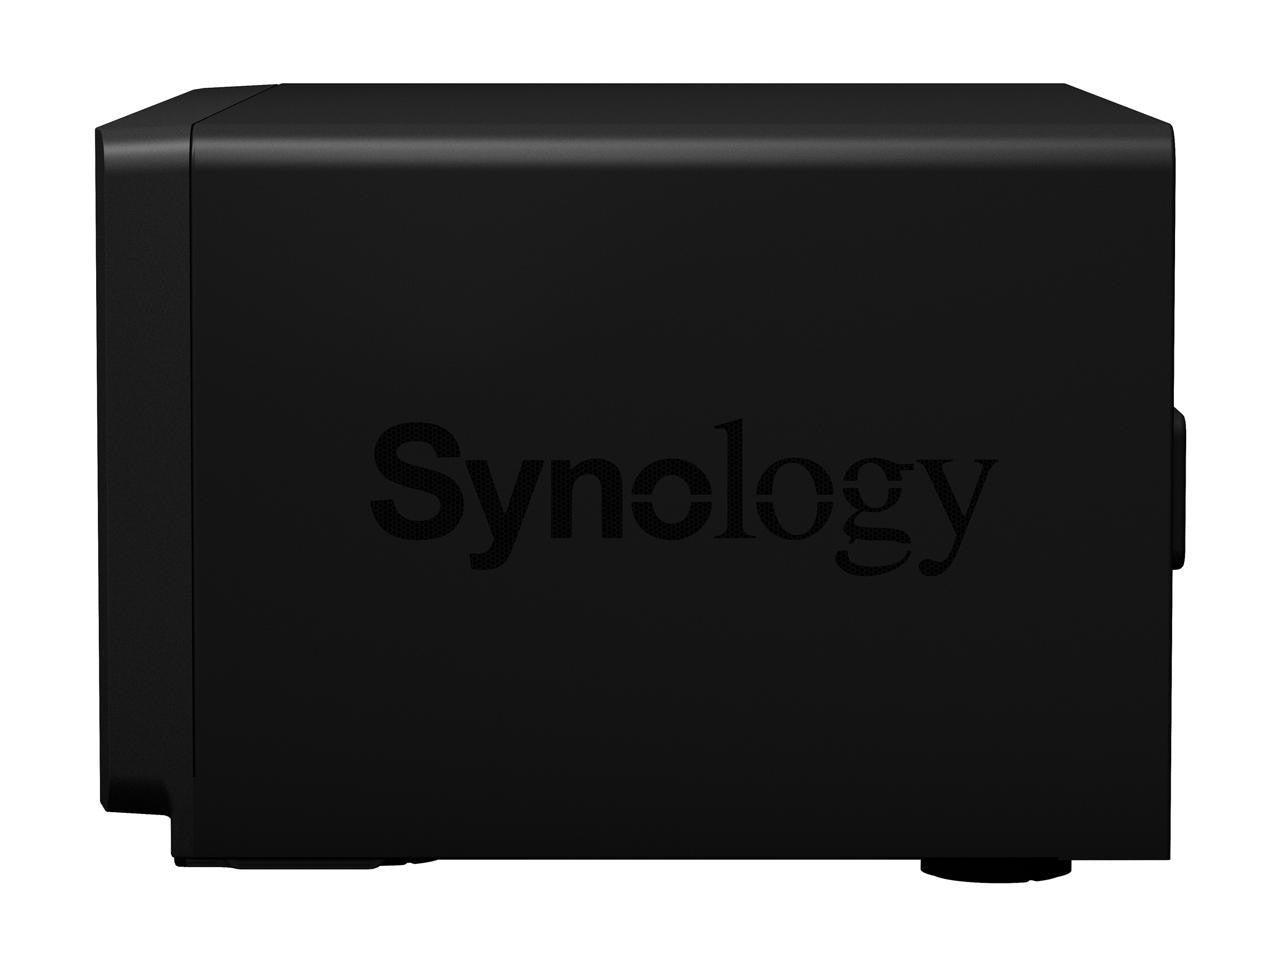 Synology DS1821+ 8-BAY DiskStation with 8GB Synology RAM and 16TB (8x2TB) Seagate Ironwolf NAS Drives Fully Assembled and Tested